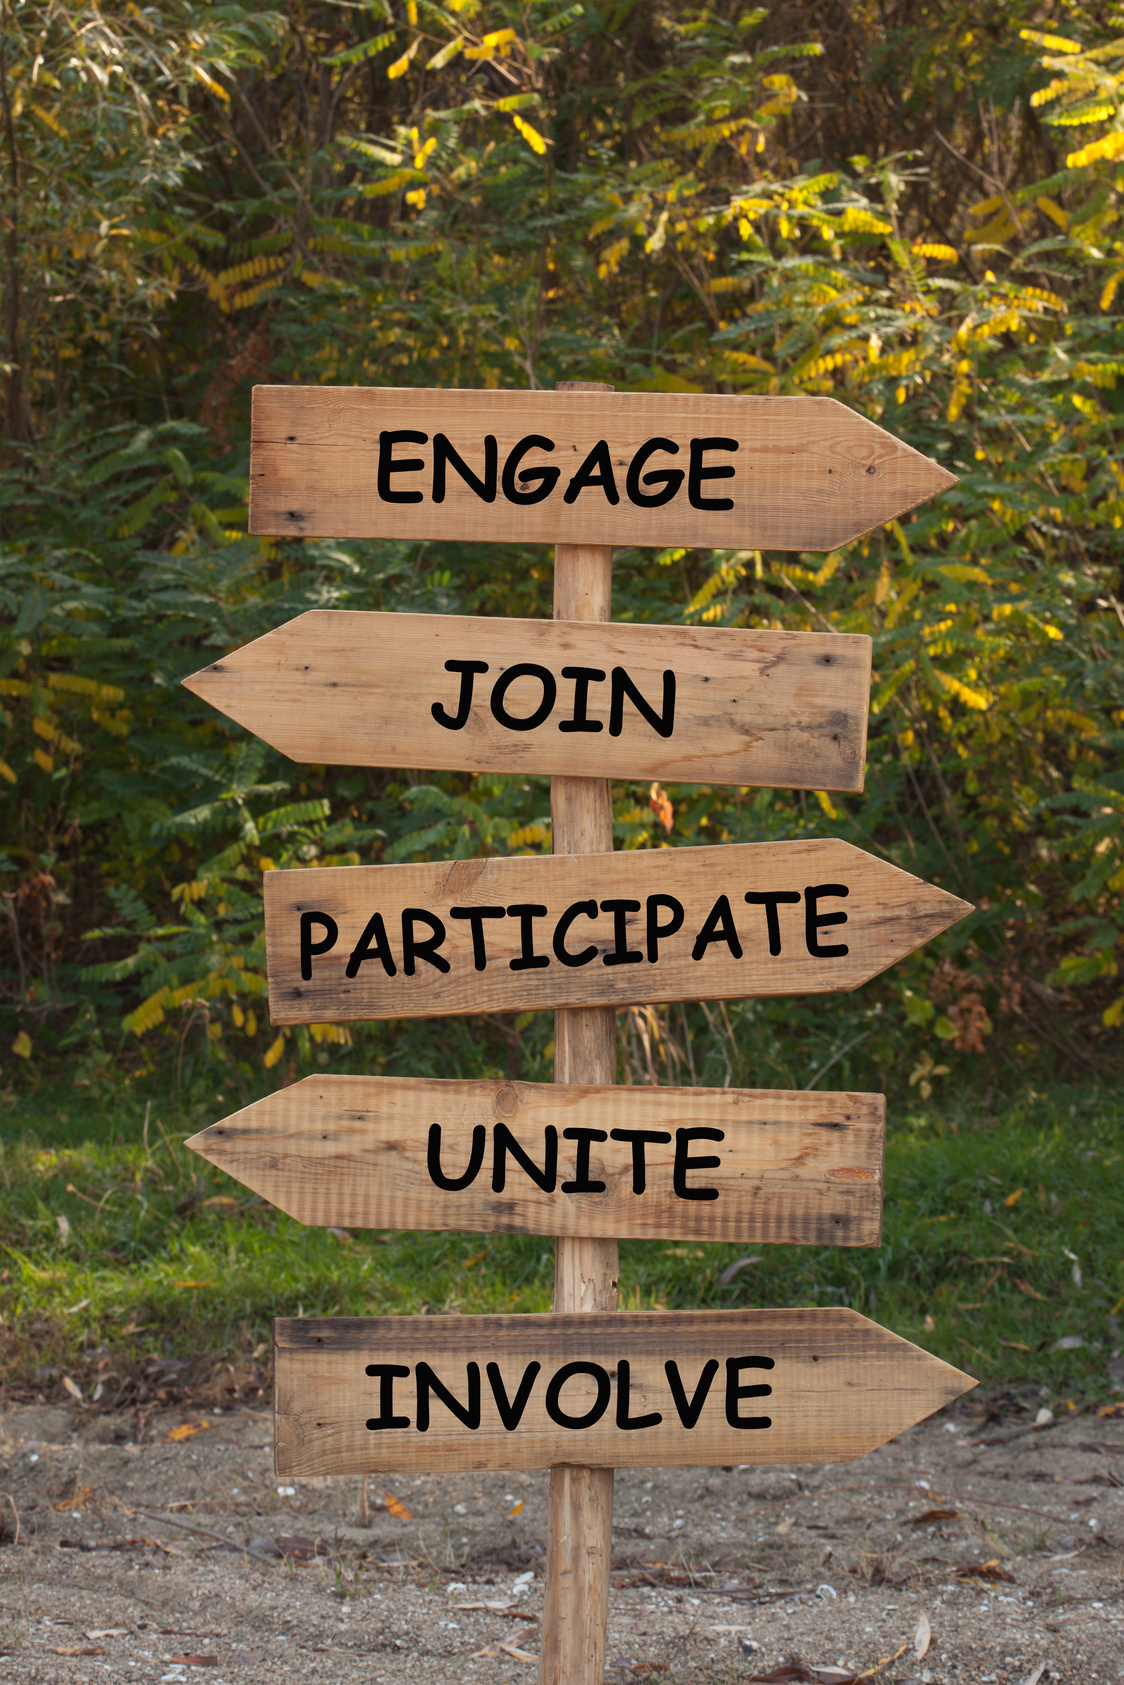 Engage Join Participate Involve